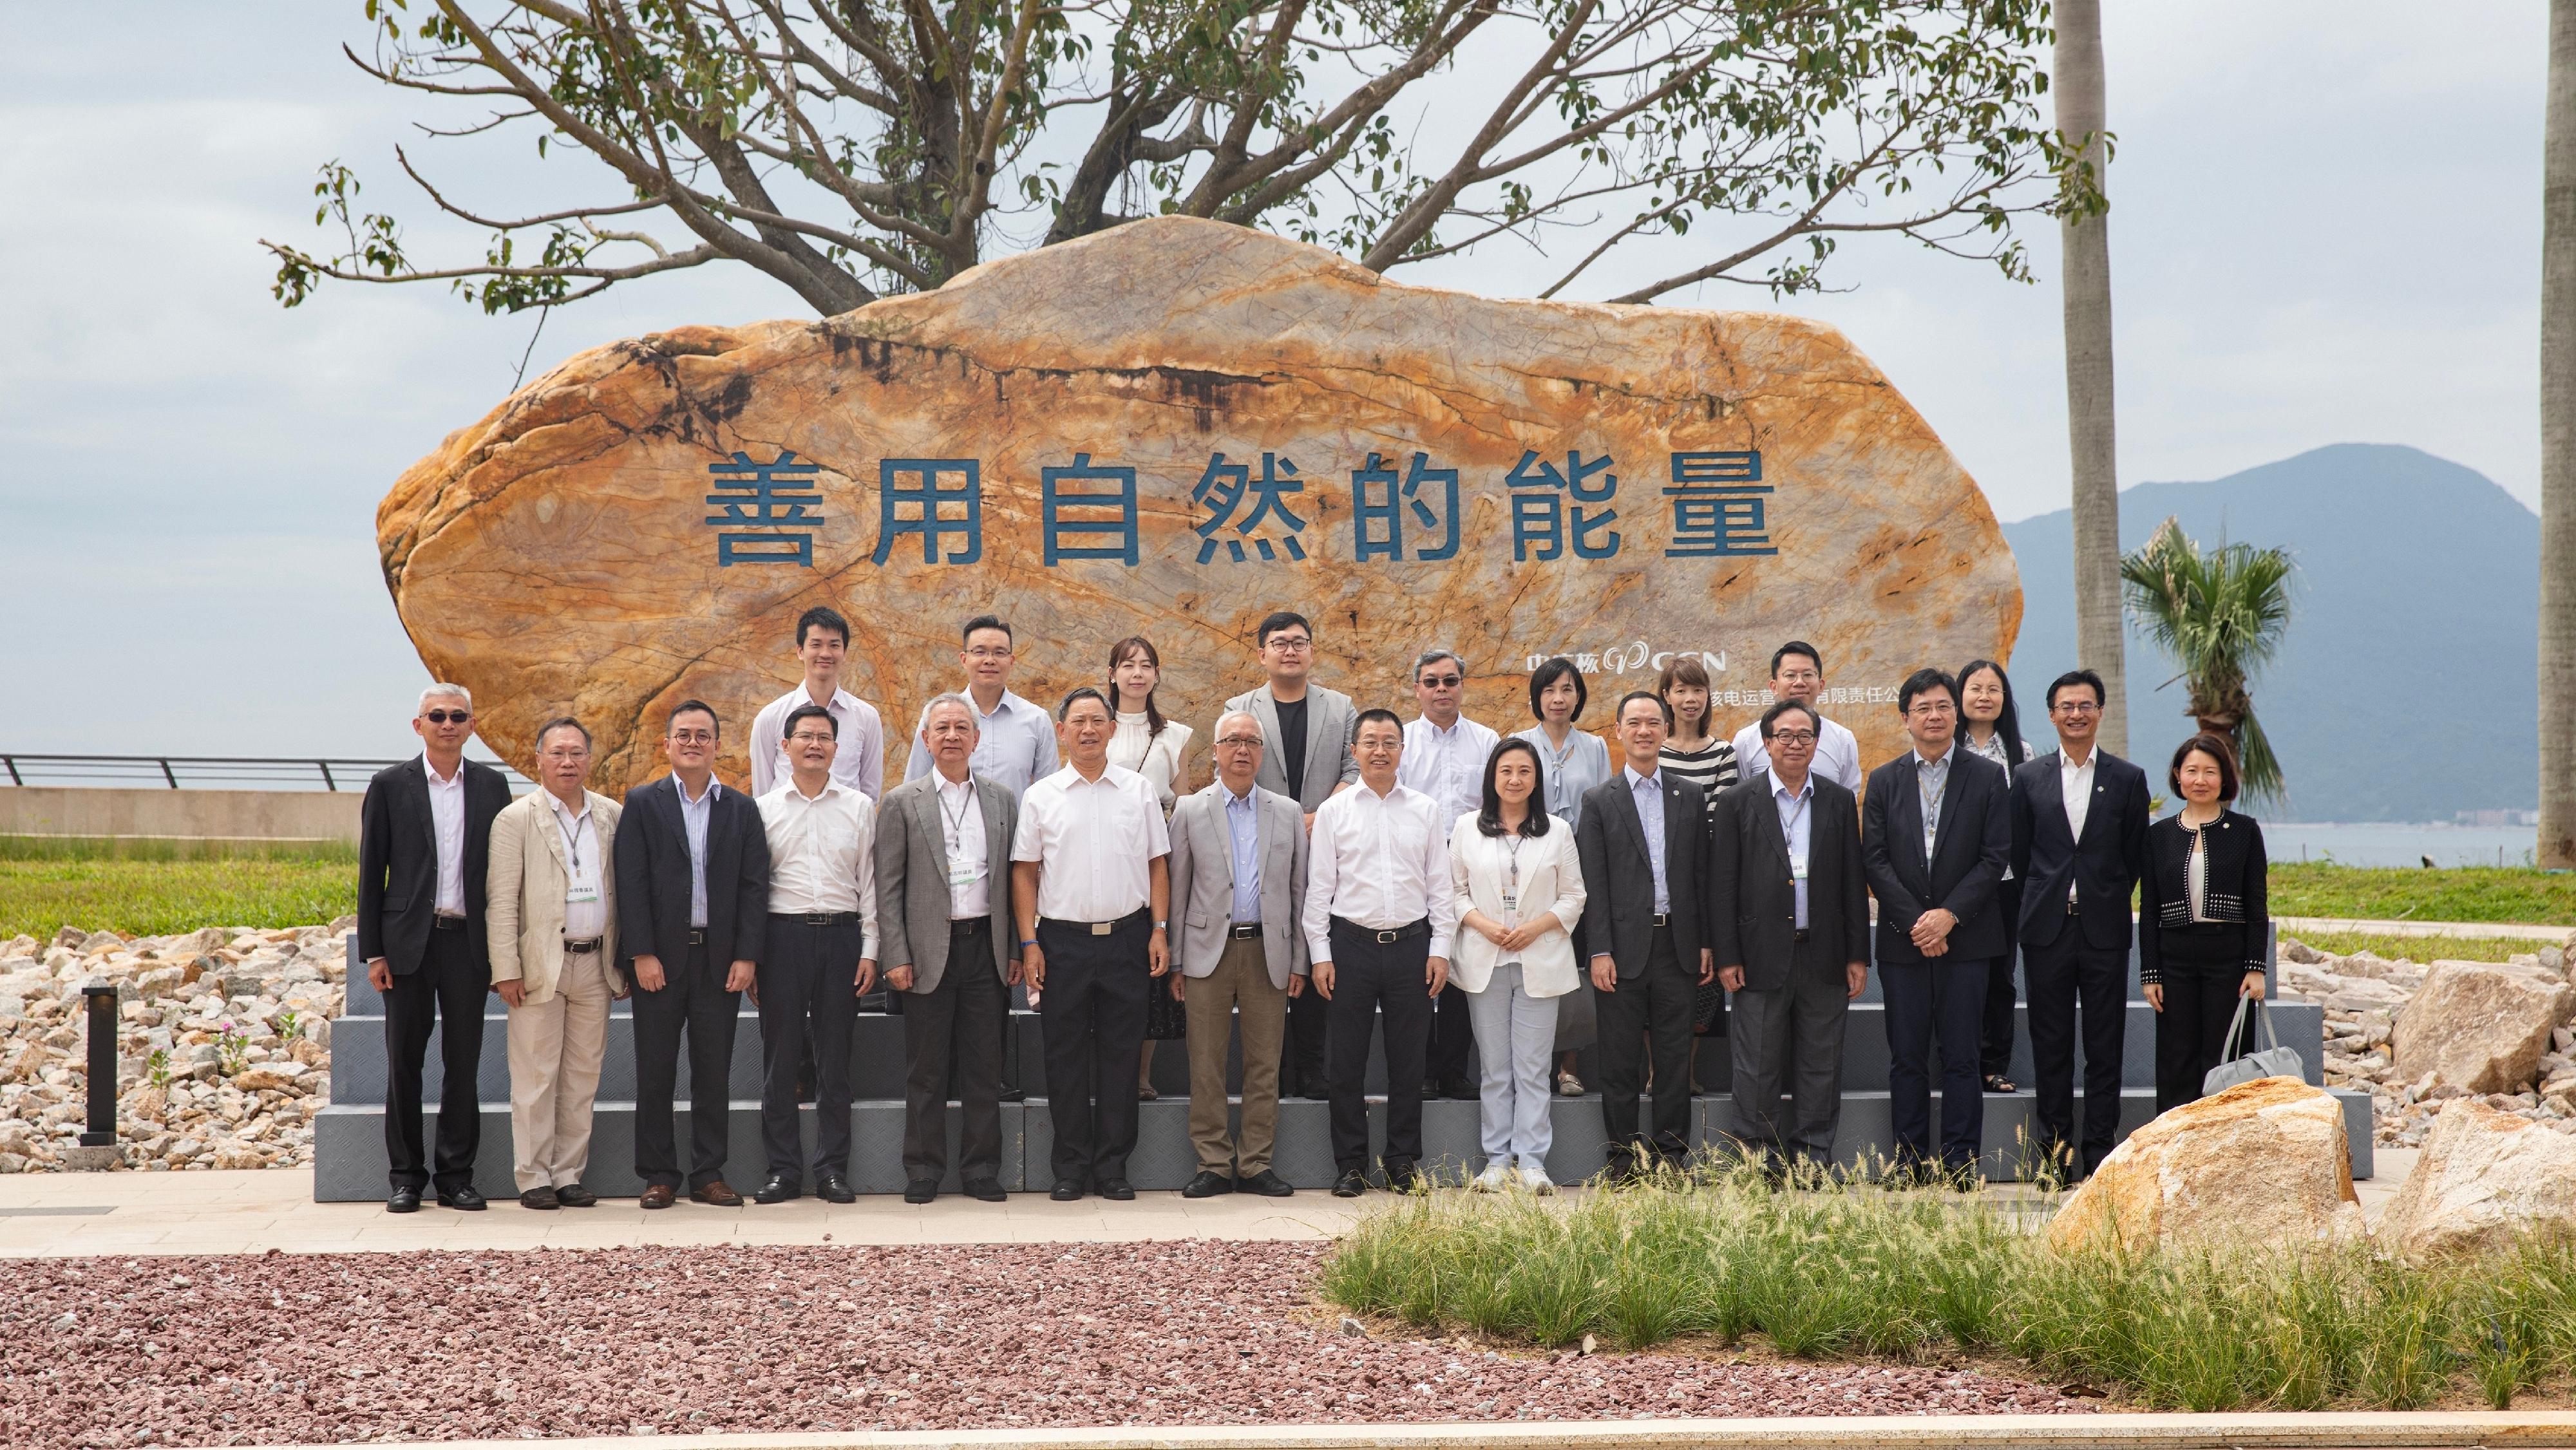 The Secretary for Environment and Ecology, Mr Tse Chin-wan, together with the Legislative Council Panel on Environmental Affairs, today (August 9) visited the Daya Bay Nuclear Power Station in the morning and listened to a briefing on the production of nuclear power and the development of nuclear energy technology in the Mainland. Photo shows Mr Tse (front row, seventh left) with the delegation of the Legislative Council Panel on Environmental Affairs, the President of the China General Nuclear Power Corporation Limited, Mr Gao Ligang (front row, seventh right), and the Managing Director of CLP Power, Mr Joseph Law (front row, fifth right), at the Daya Bay Nuclear Power Station.